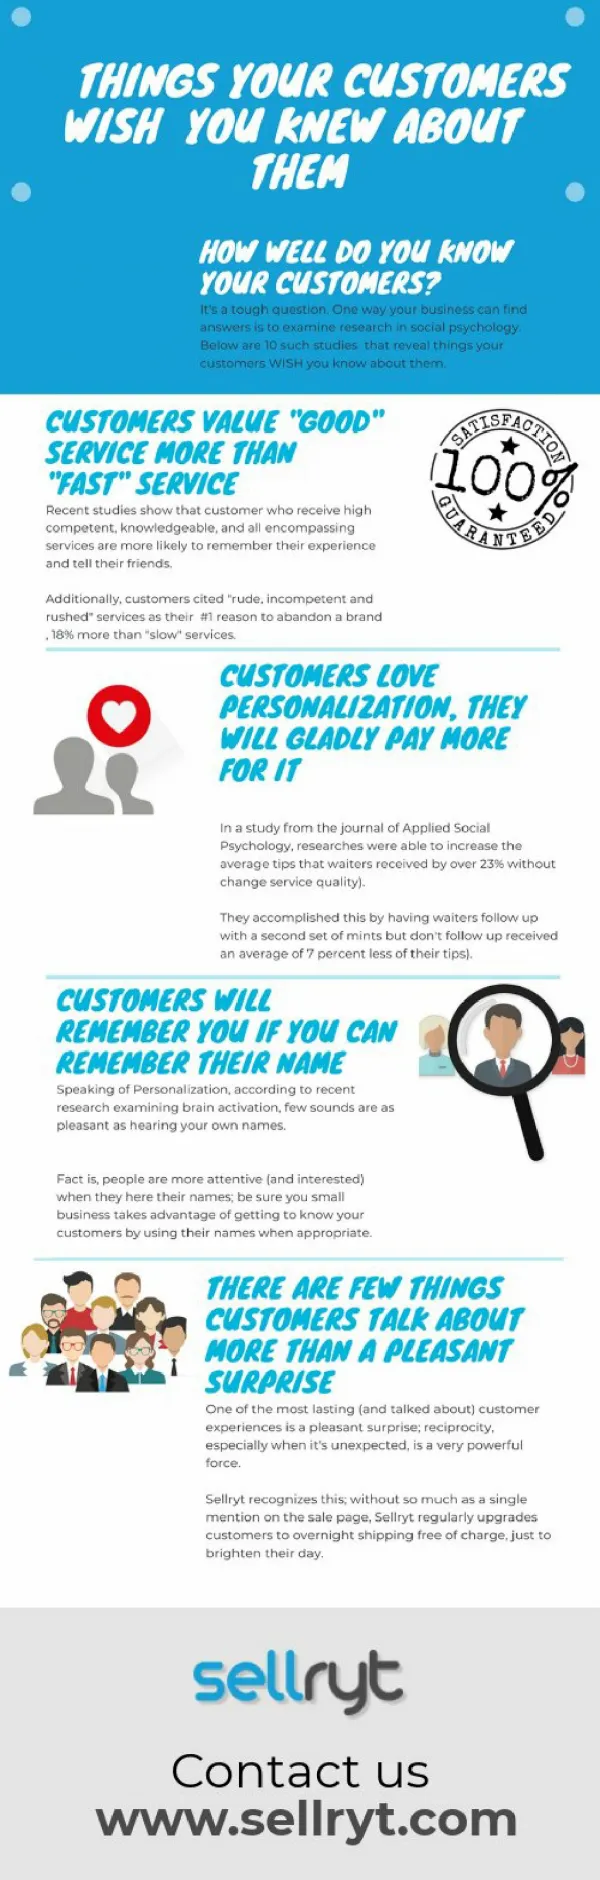 Things Your Customers Wish You Knew About Them